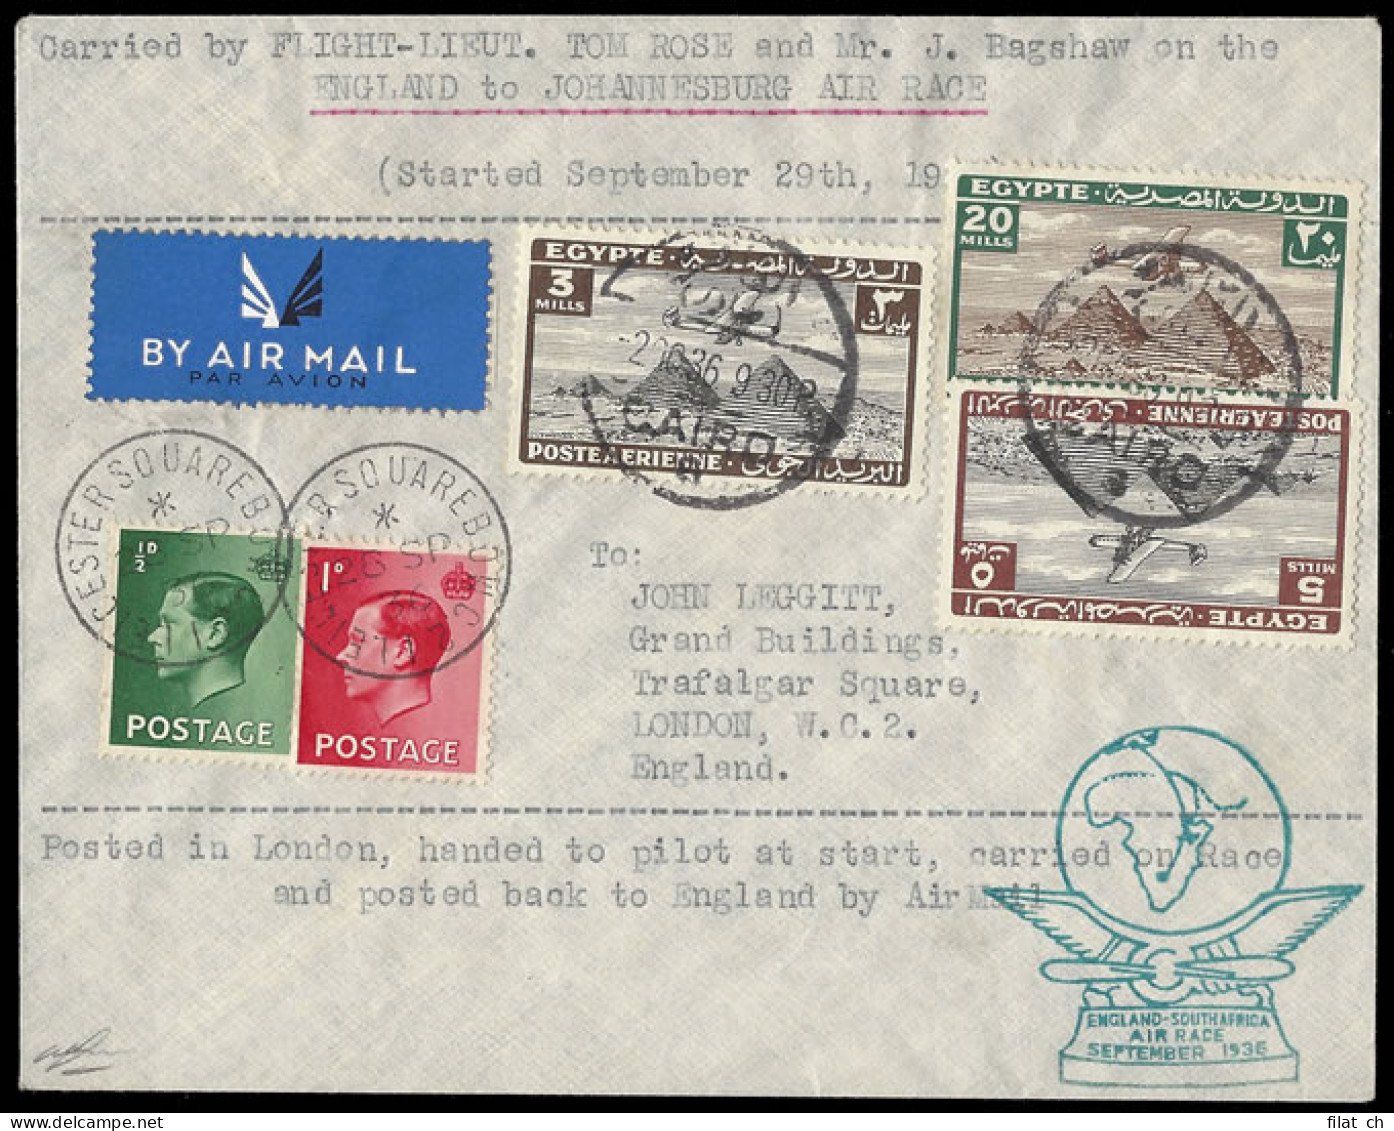 South Africa 1936 Schlesinger Air Race Rose & Bagshaw Signed - Luchtpost